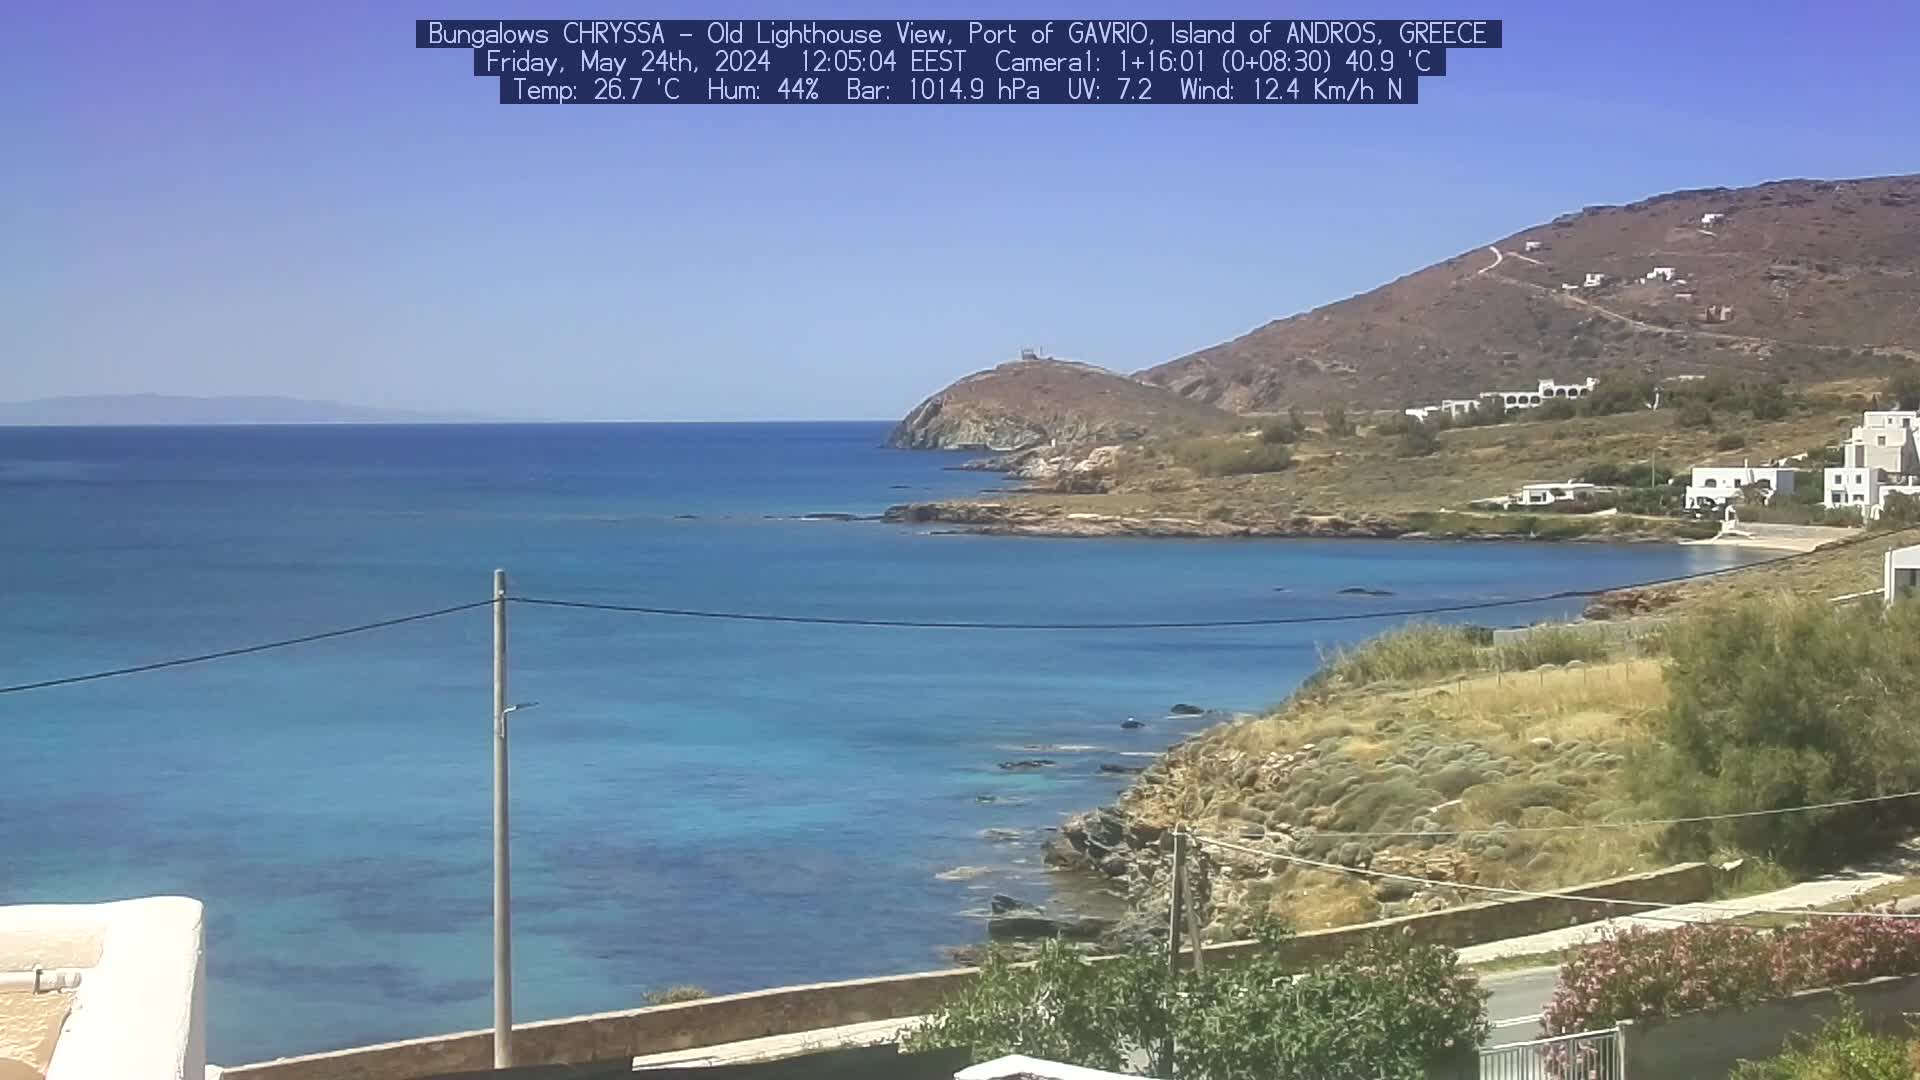 Gavrio (Andros) Wed. 12:05